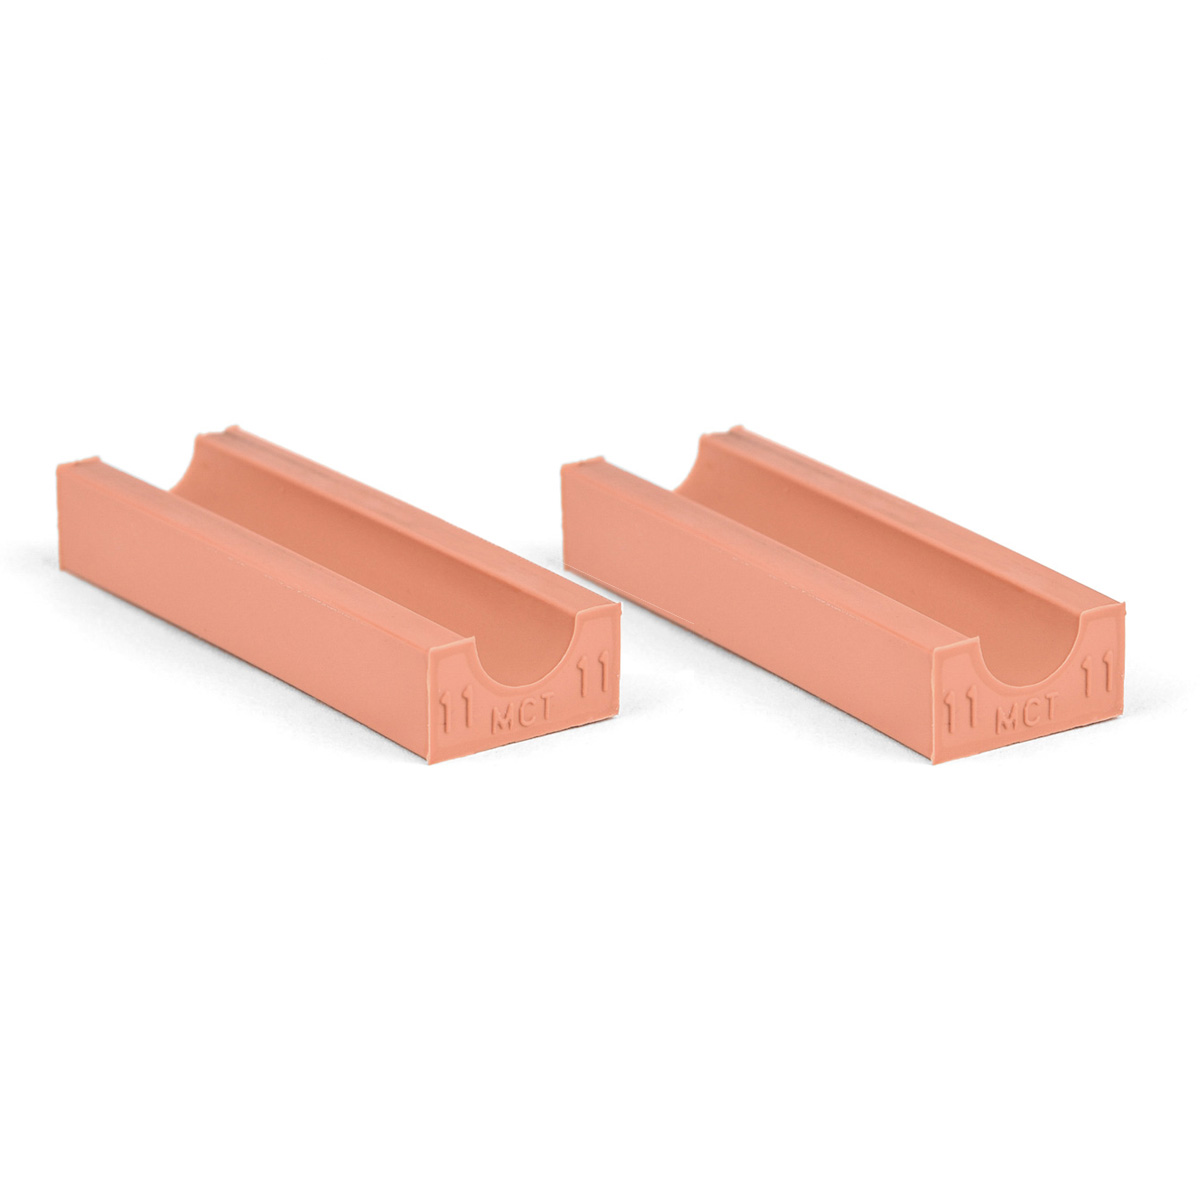 20-11*2 Set of 2 half insert block lycron, 20-11 for cable/pipe diam. 10.5-11.5mm